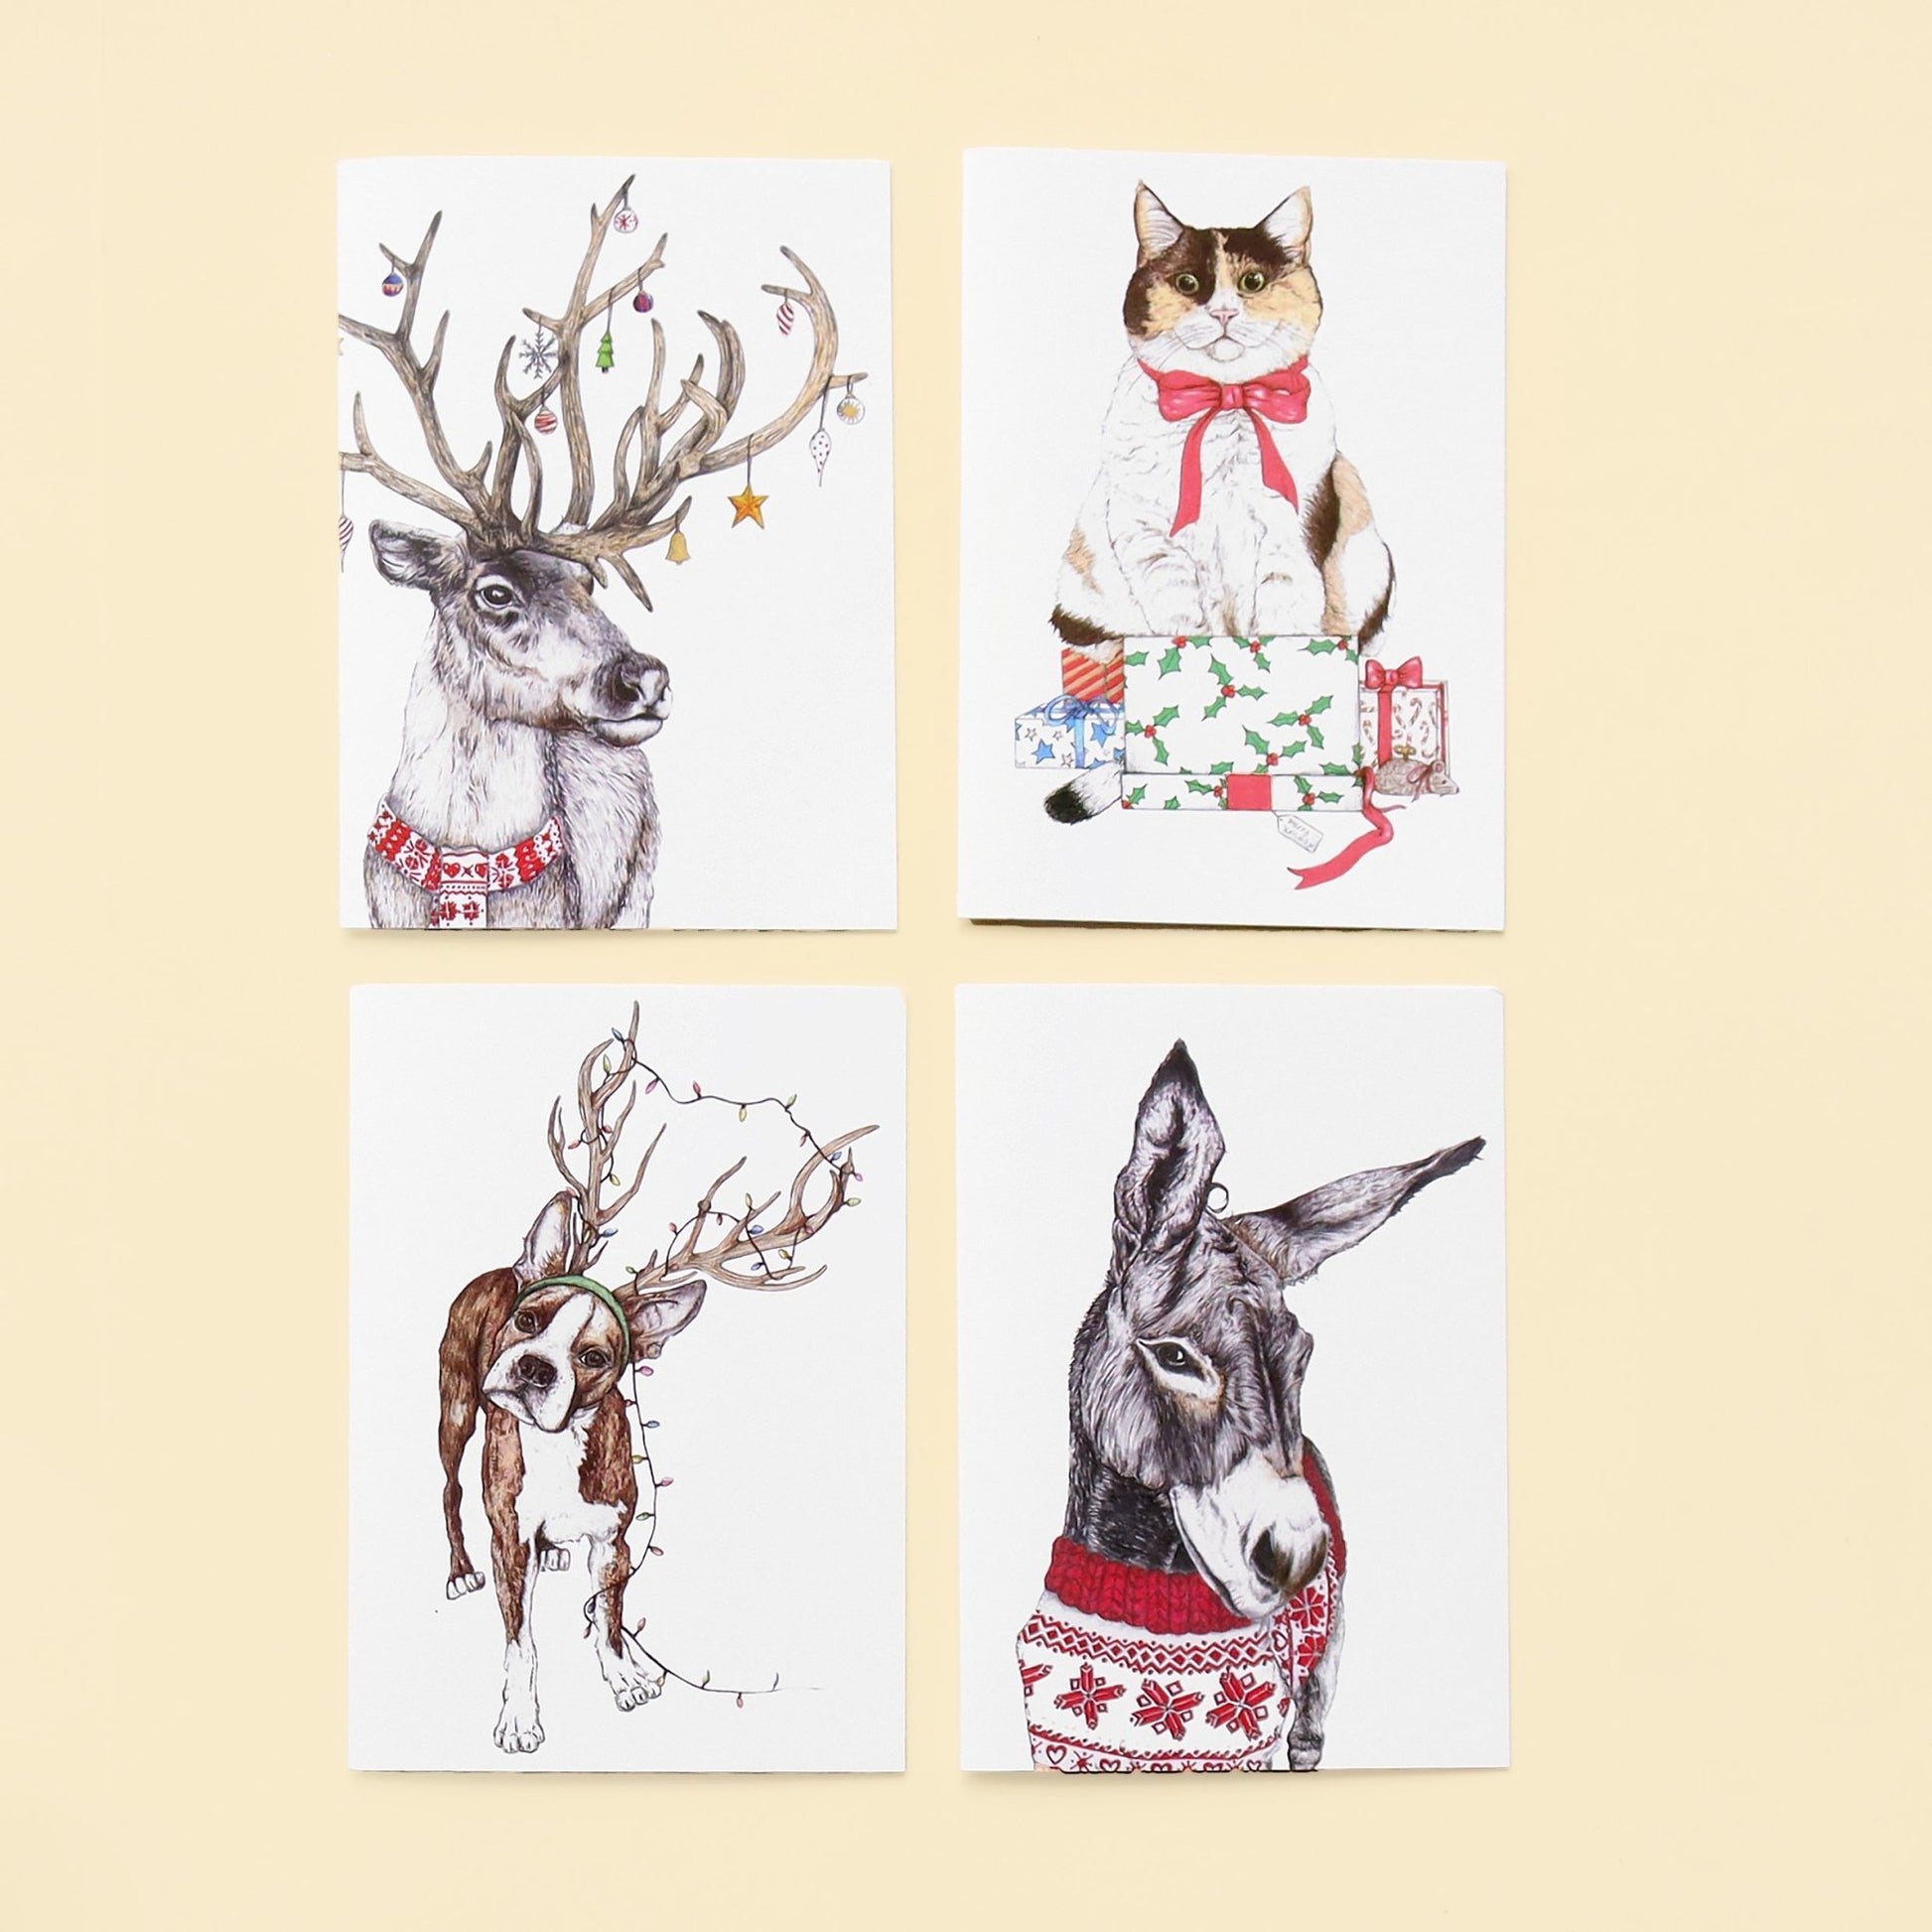 Santa's Helper Cat Greeting Card - Fawn and Thistle